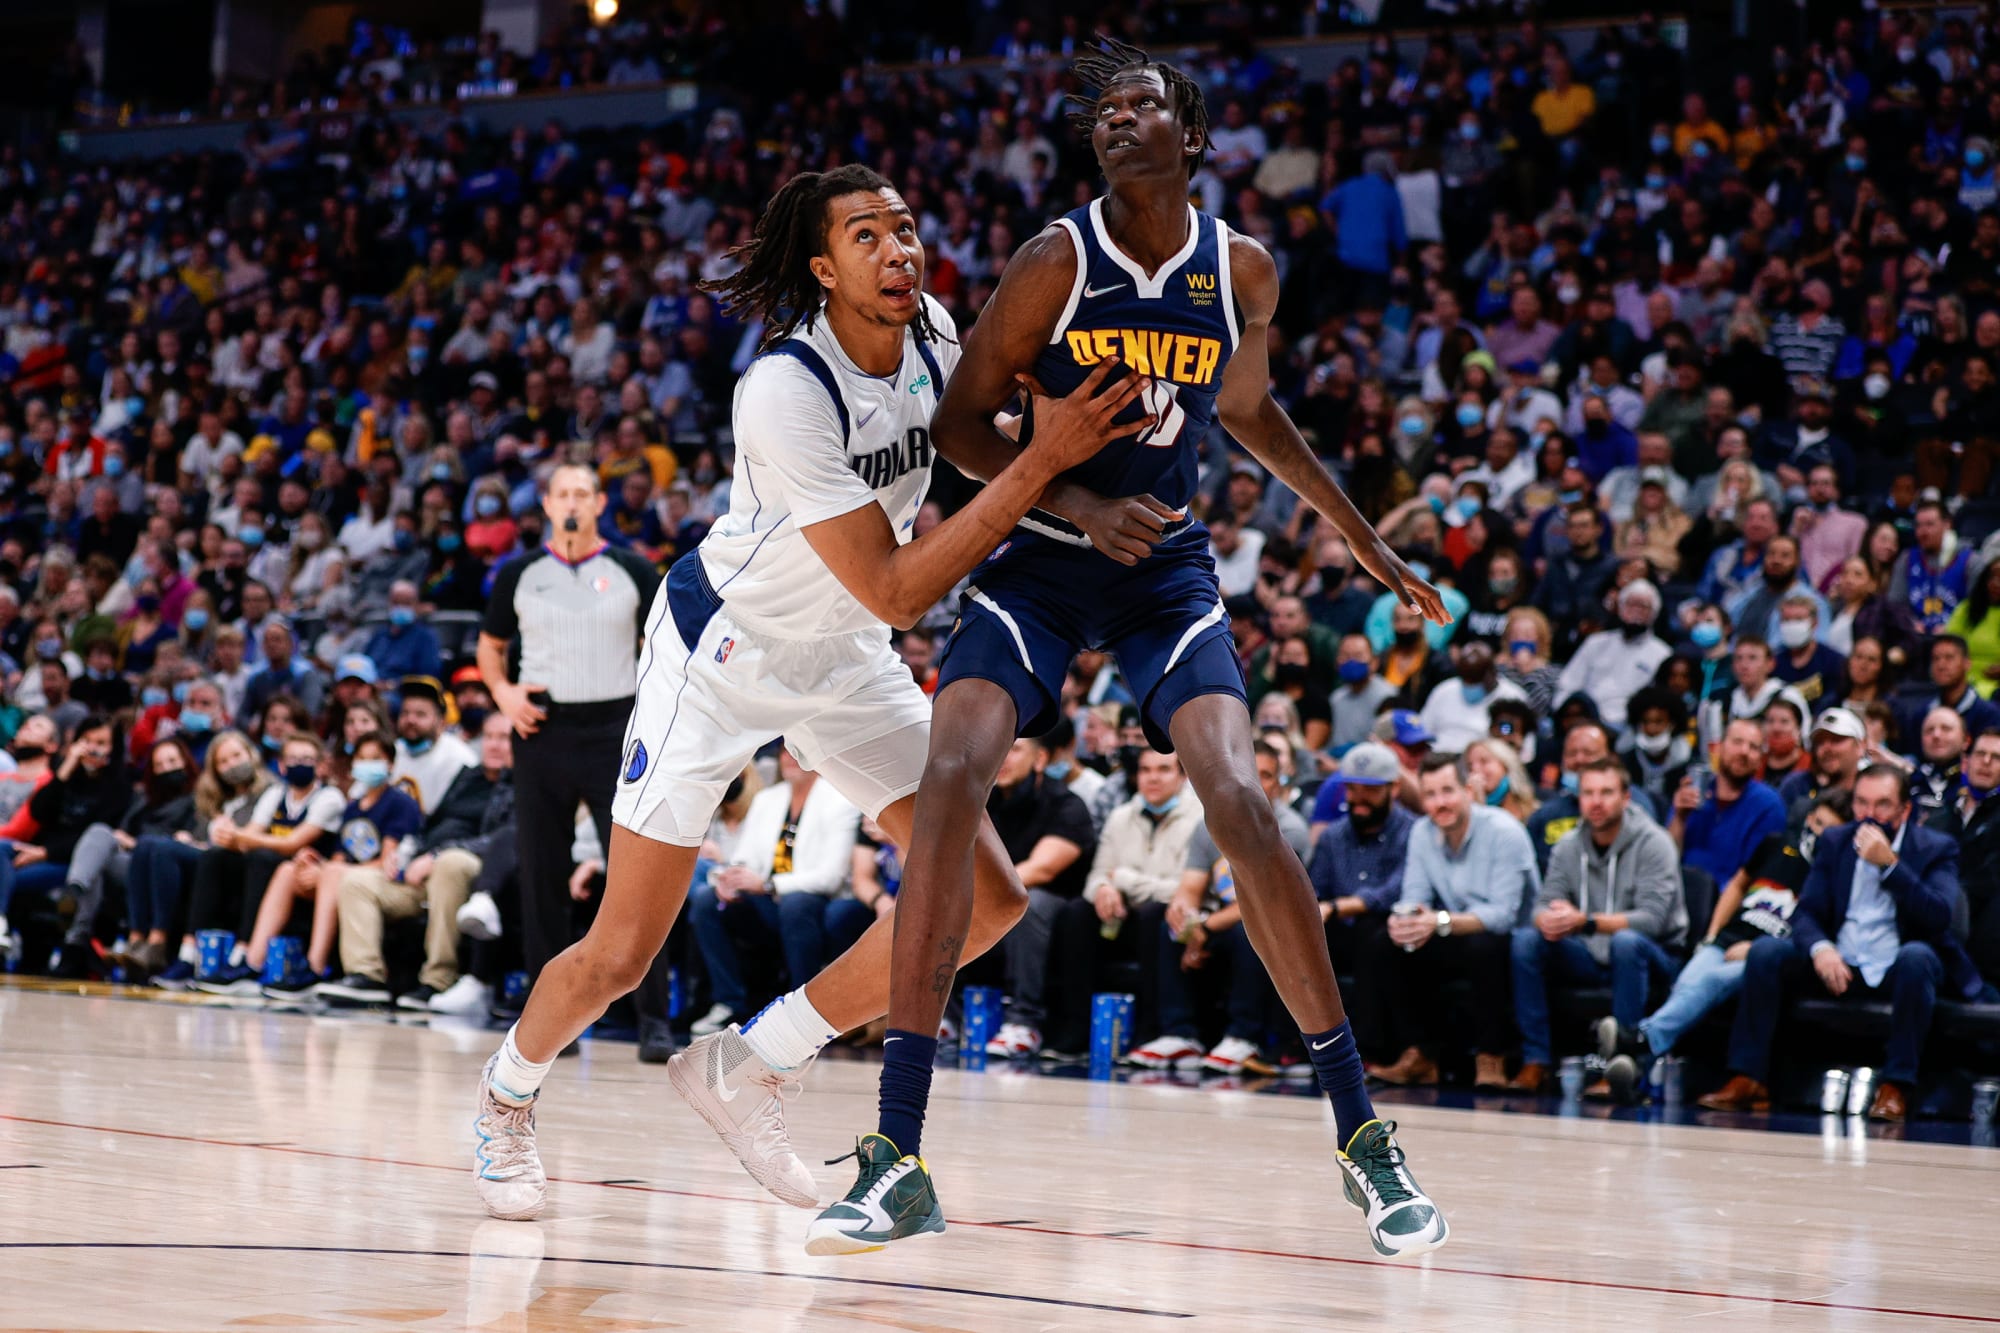 Why Bol Bol Is BALLING OUT With Orlando Magic 